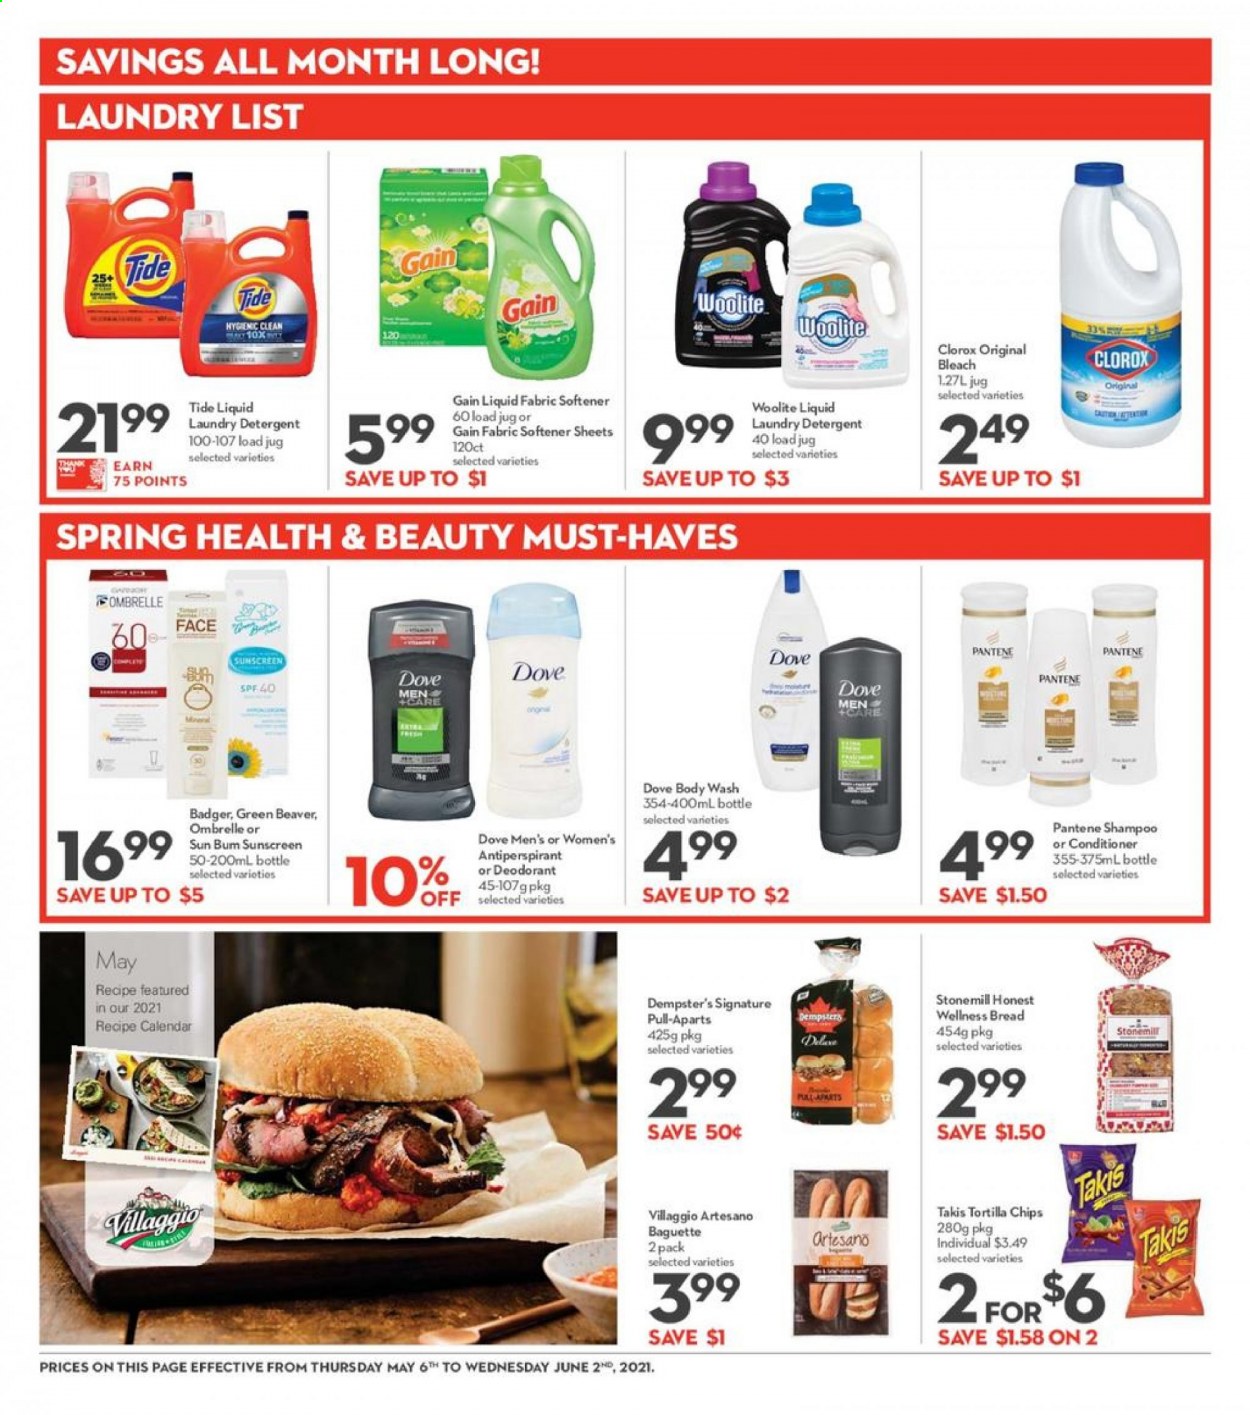 thumbnail - Longo's Flyer - May 20, 2021 - June 02, 2021 - Sales products - bread, tortilla chips, Gain, bleach, Clorox, Woolite, Tide, fabric softener, laundry detergent, body wash, conditioner, anti-perspirant, Pantene, chips, deodorant. Page 20.